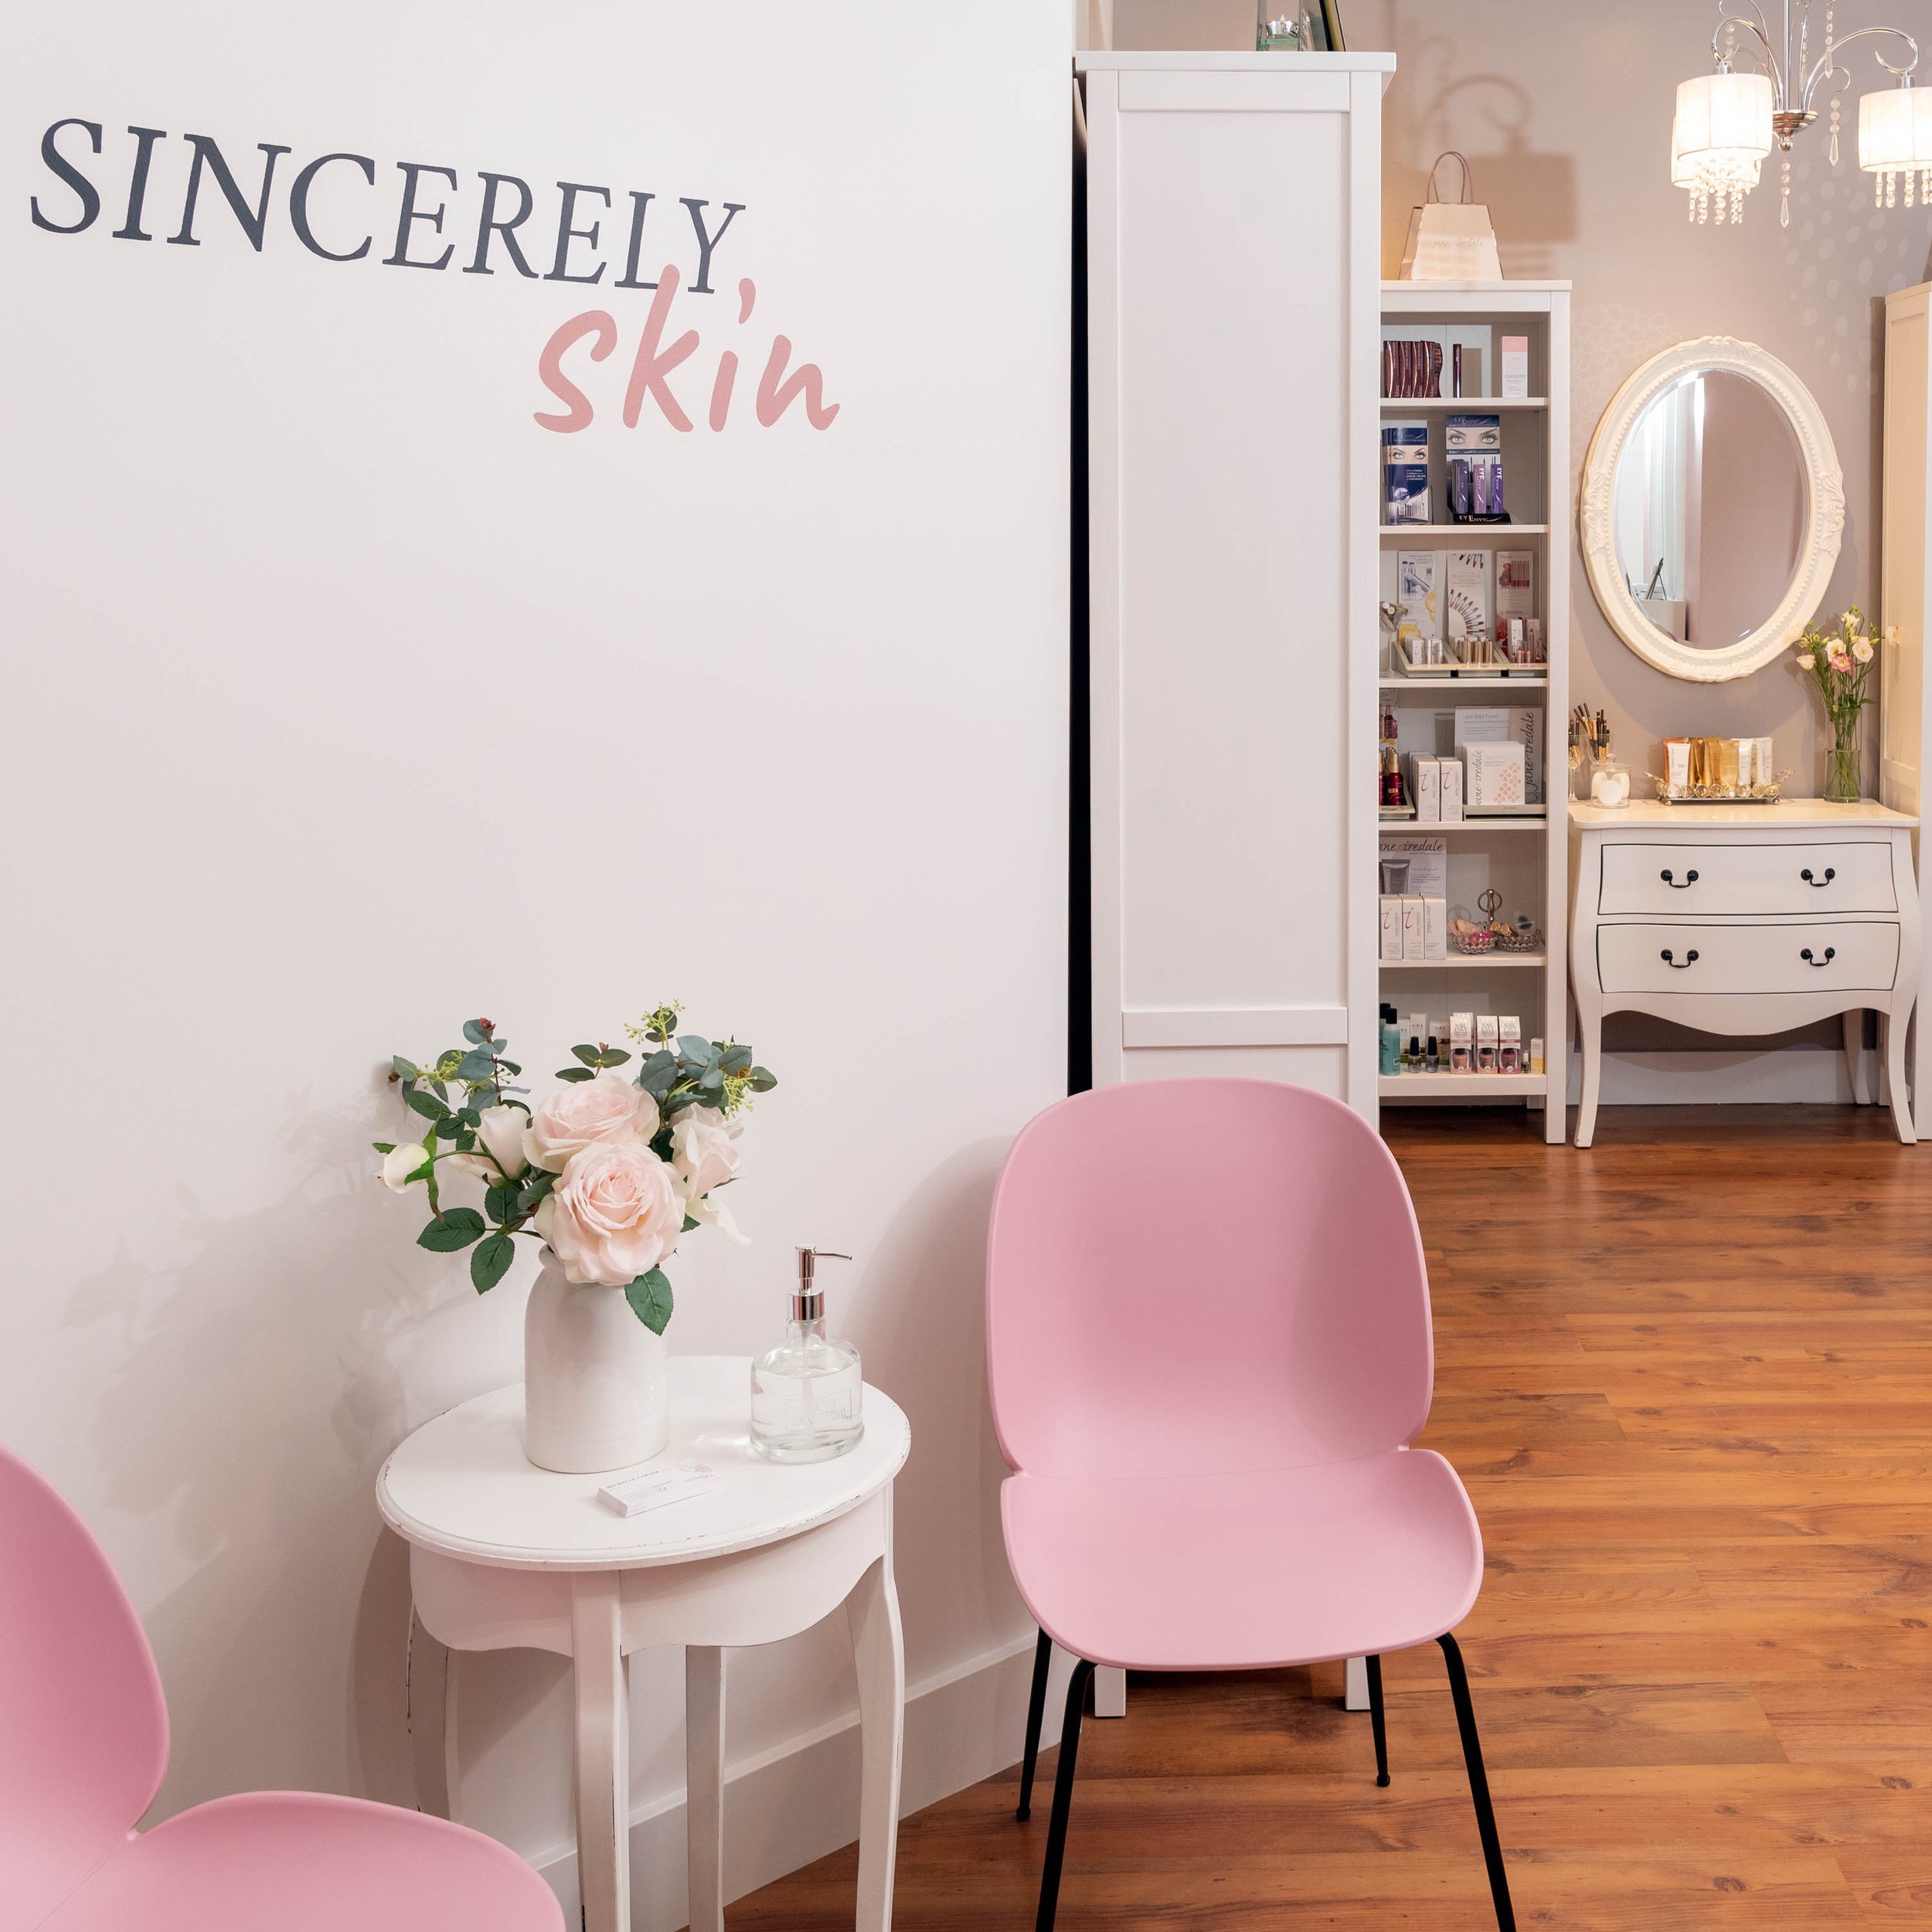 Sincerely Skin Spa And Laser Boutique Serving Halifax Since 2010 Facials Massage